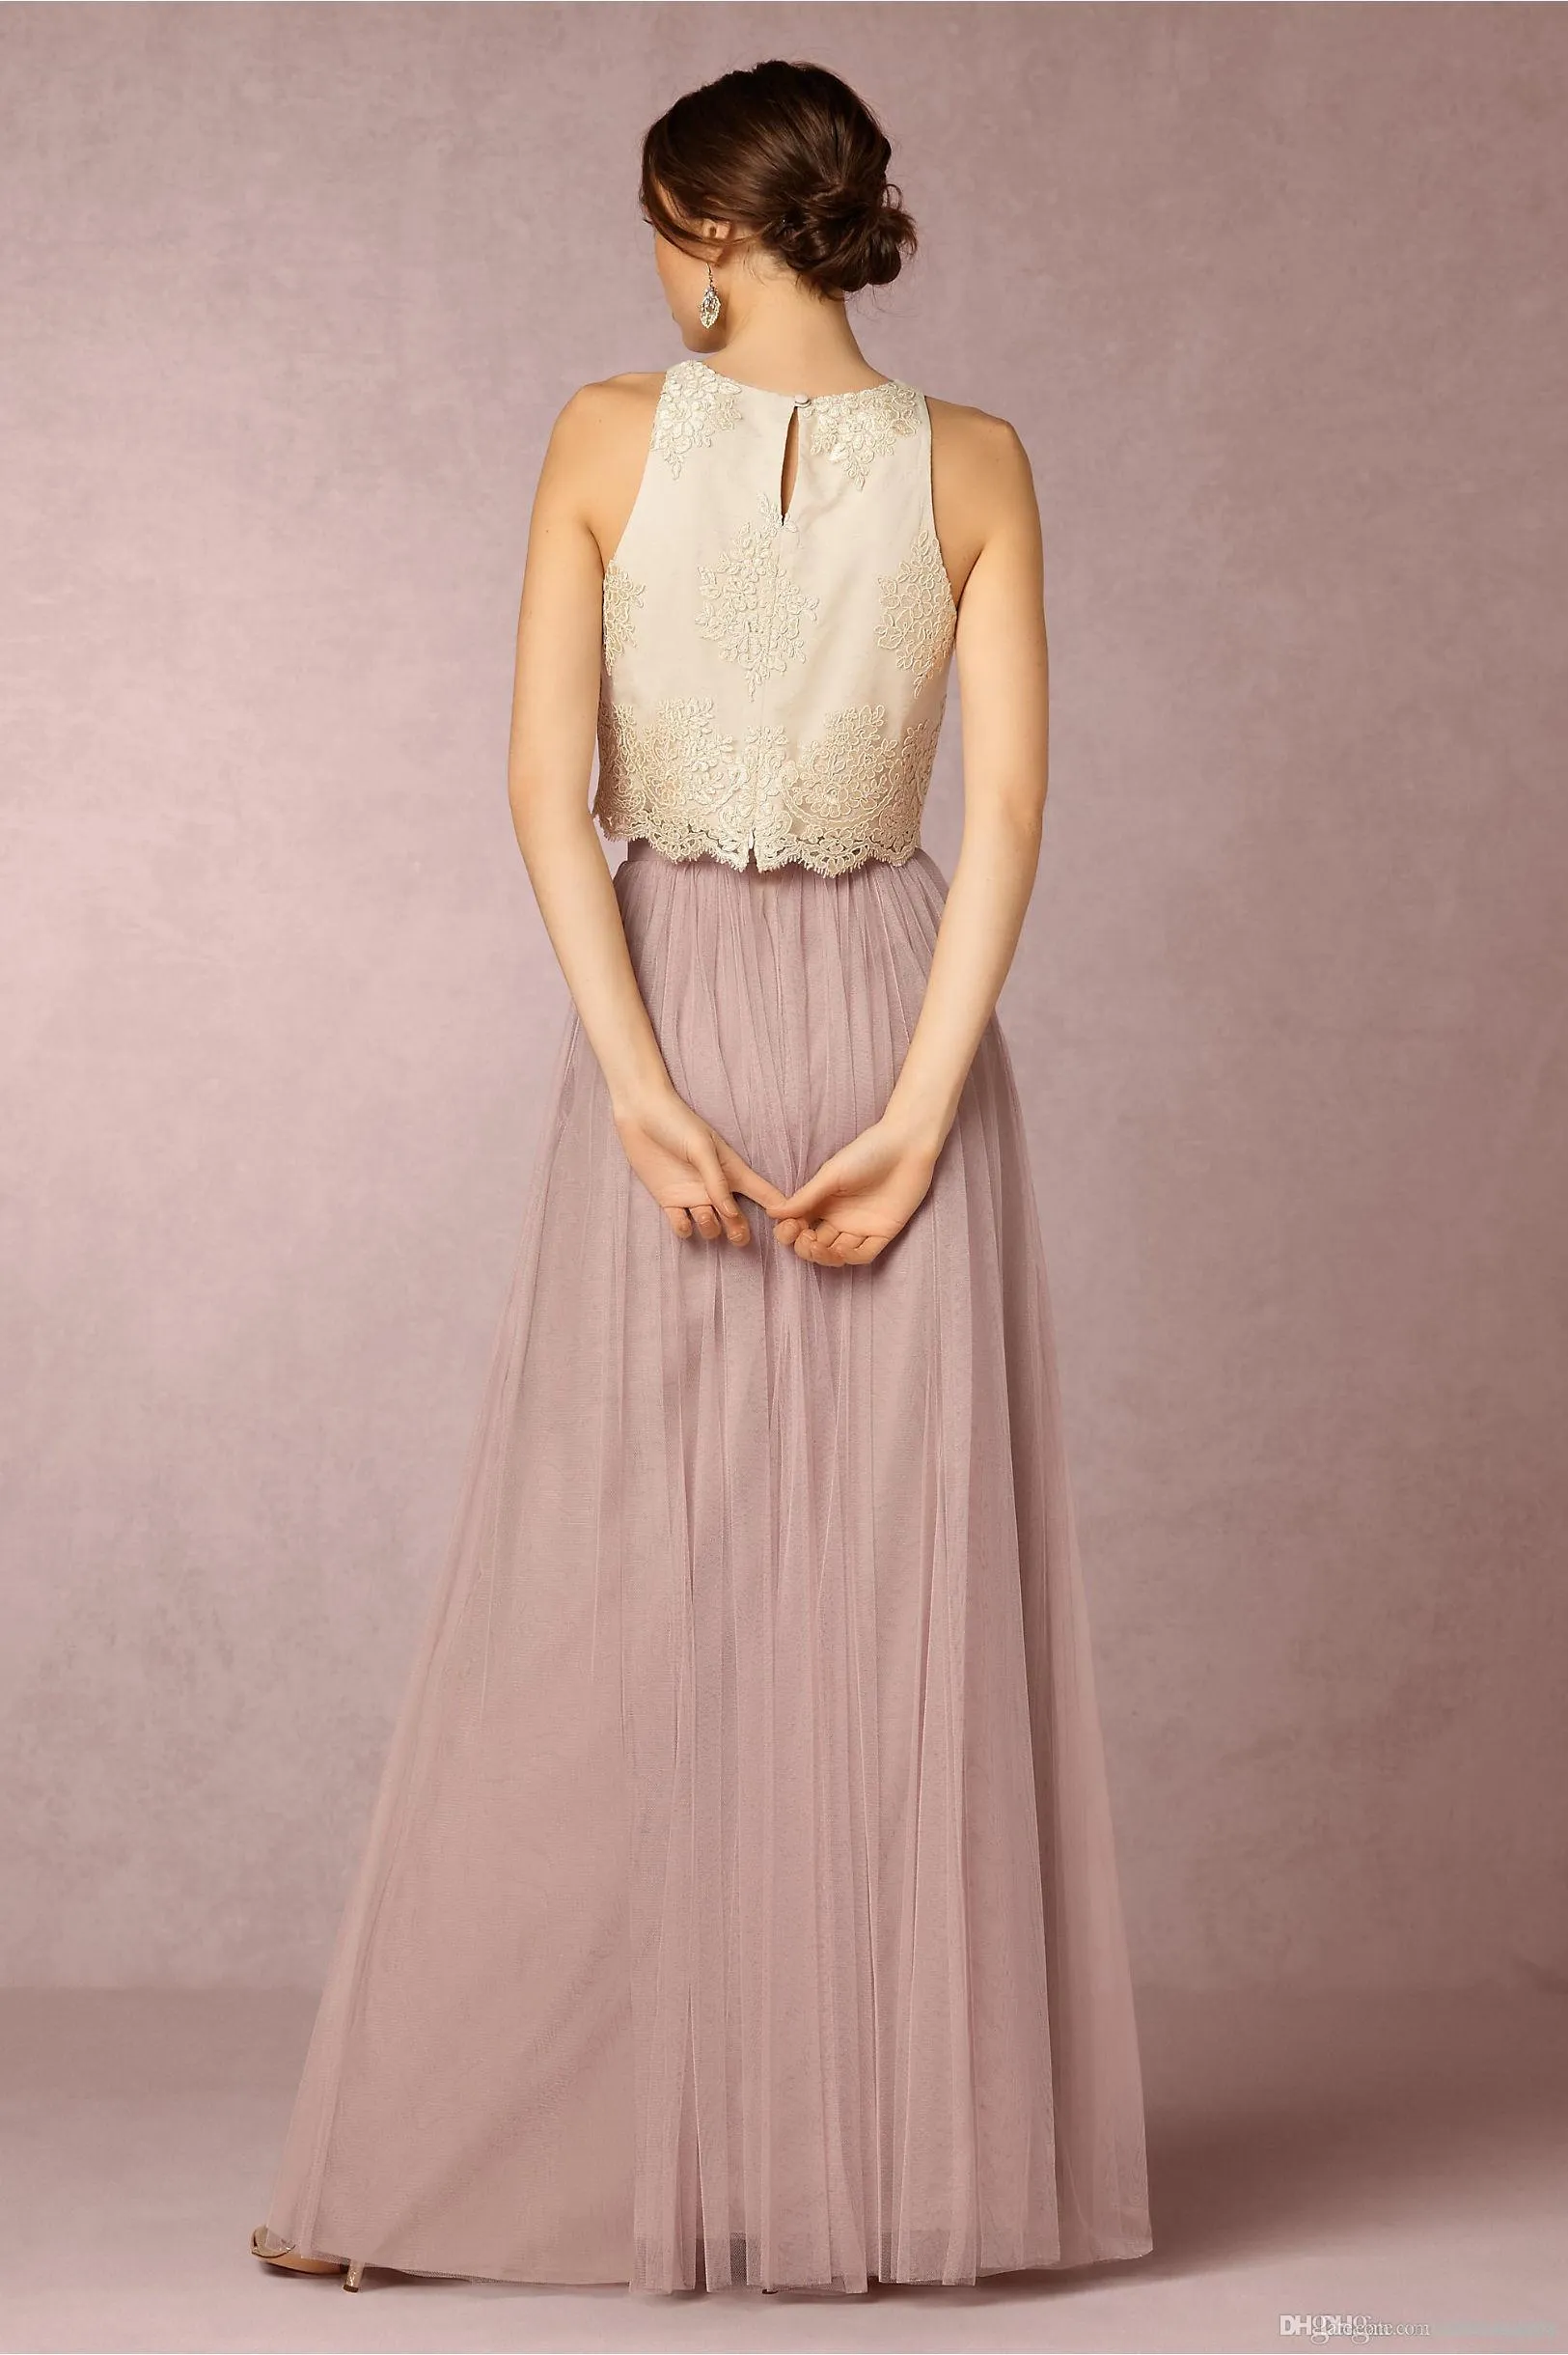 Two Pieces Bridesmaids Dresses Jewel Neck Chiffon Tulle A Line Pleats Lace  Applique Floor Length Bridesmaid Dress Wedding Party From Allanhu, $77.15